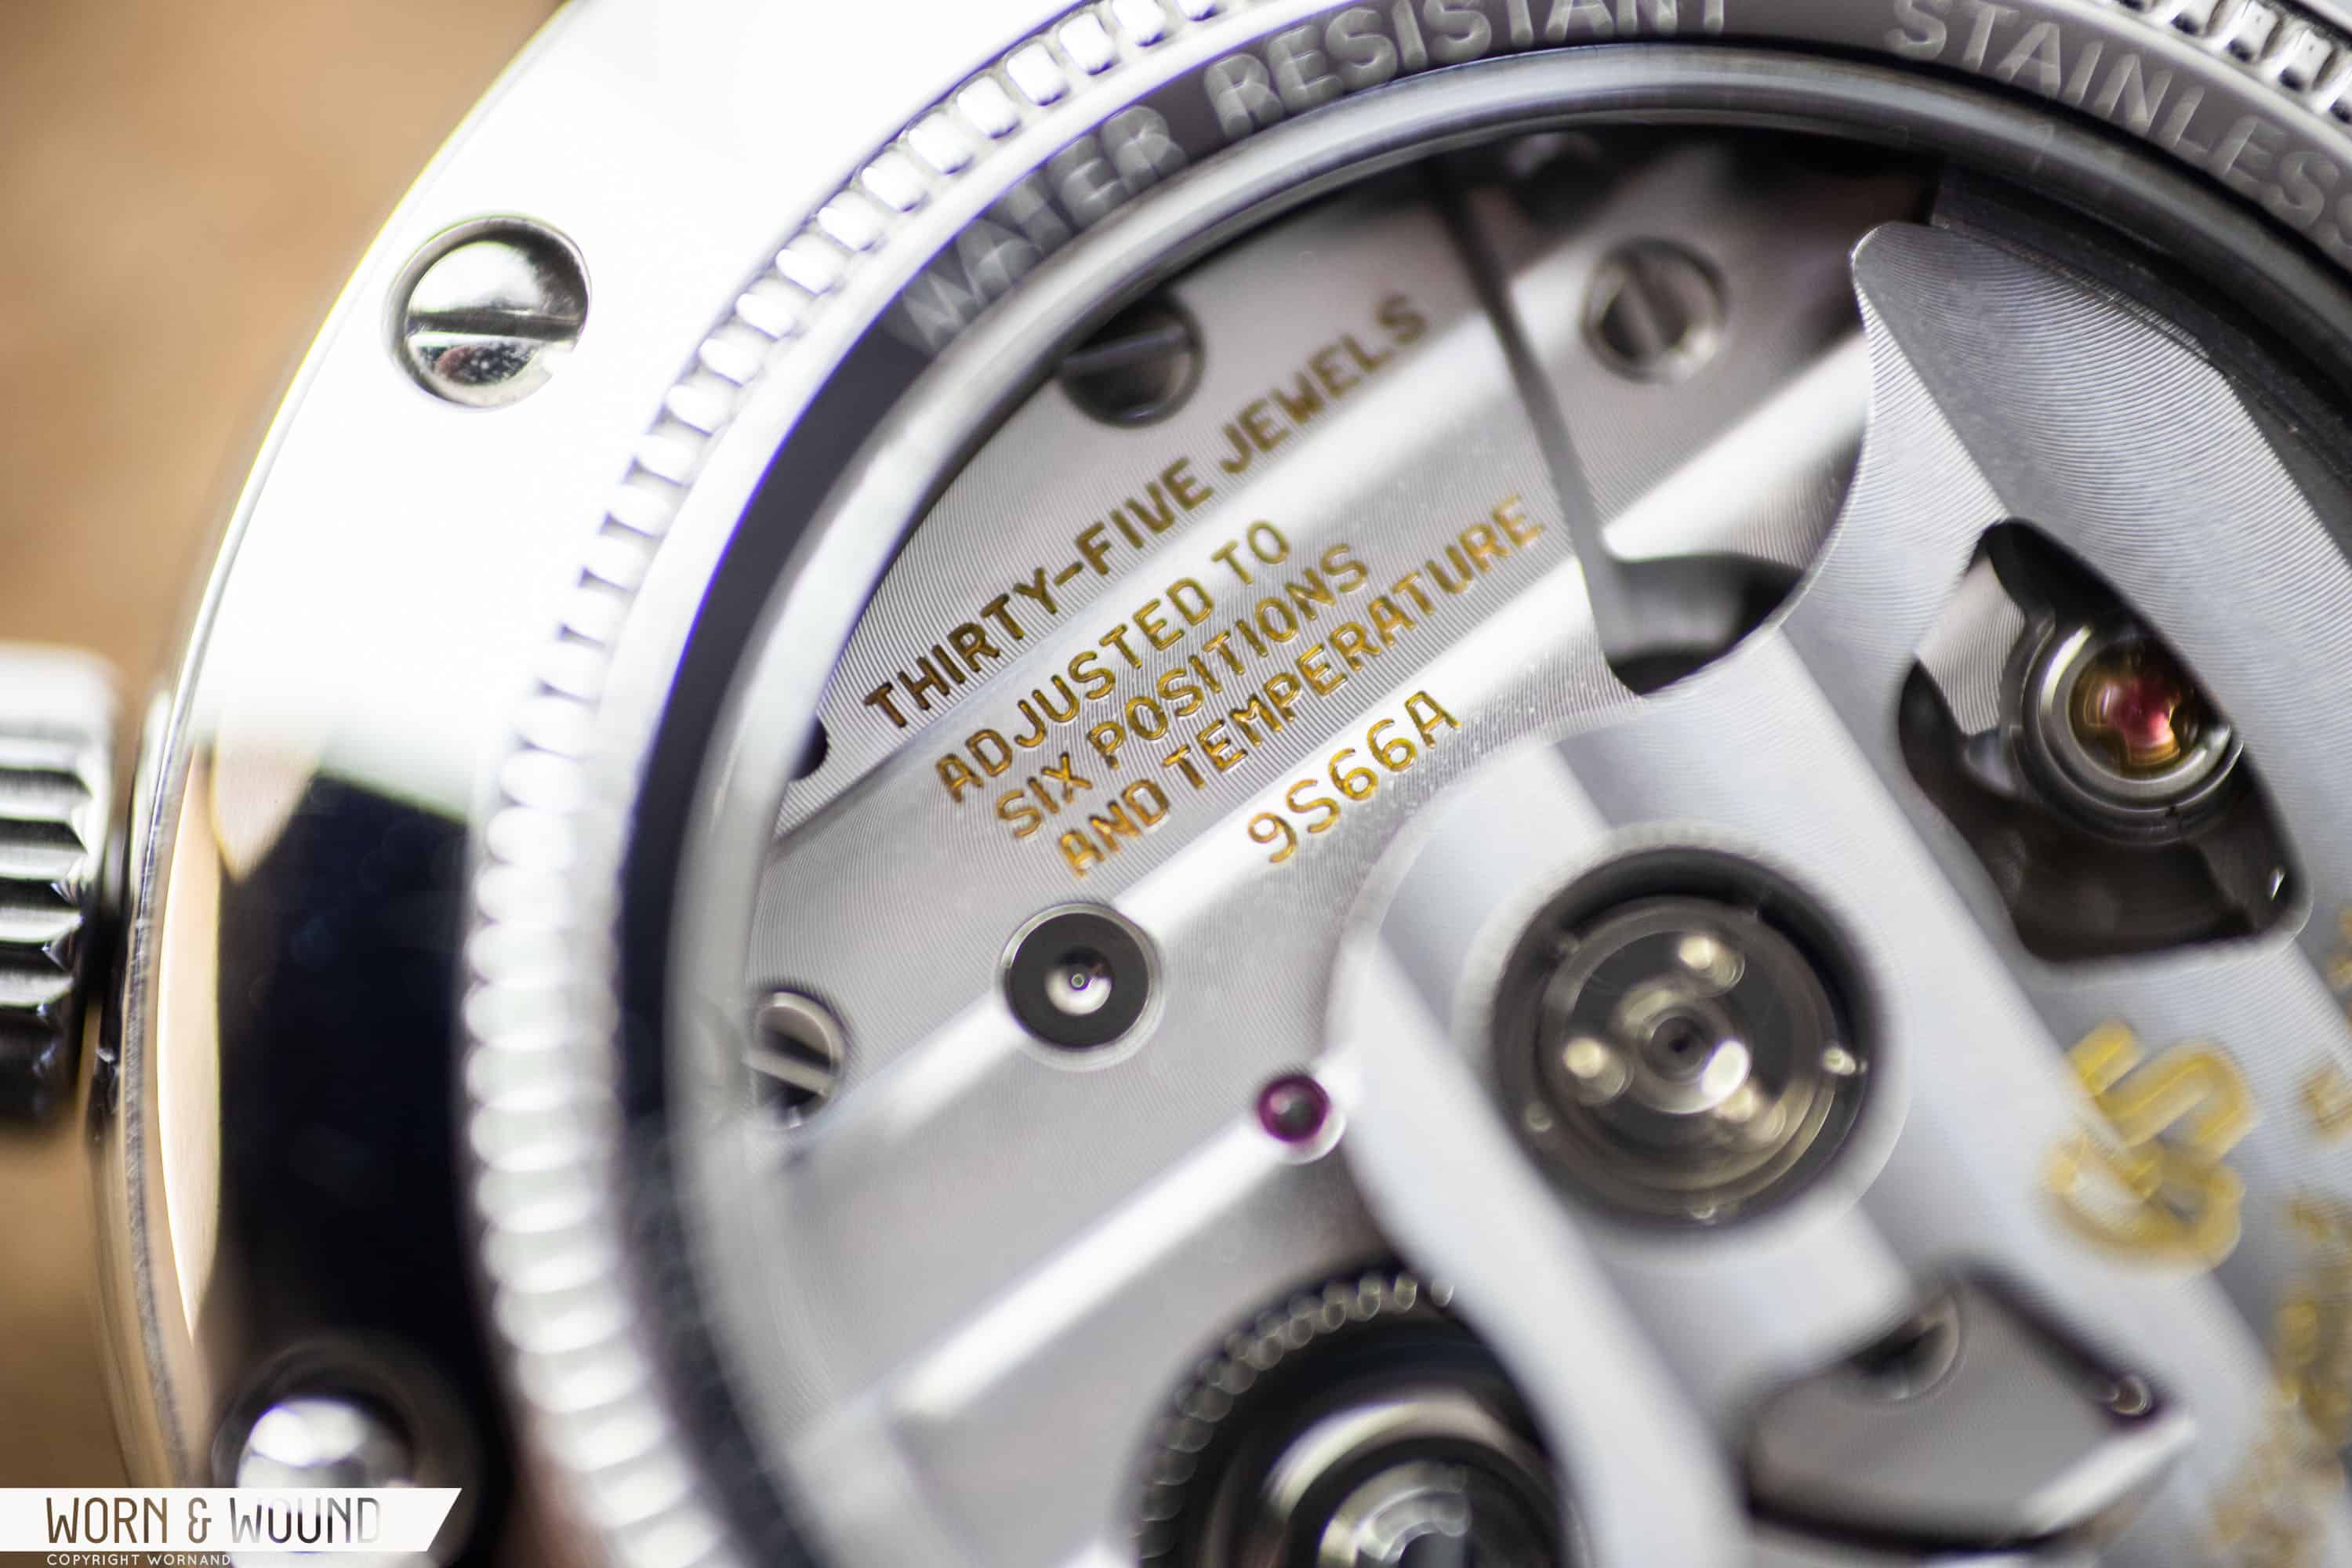 A Look Inside Grand Seiko's 9S Mechanical Movement - Worn & Wound